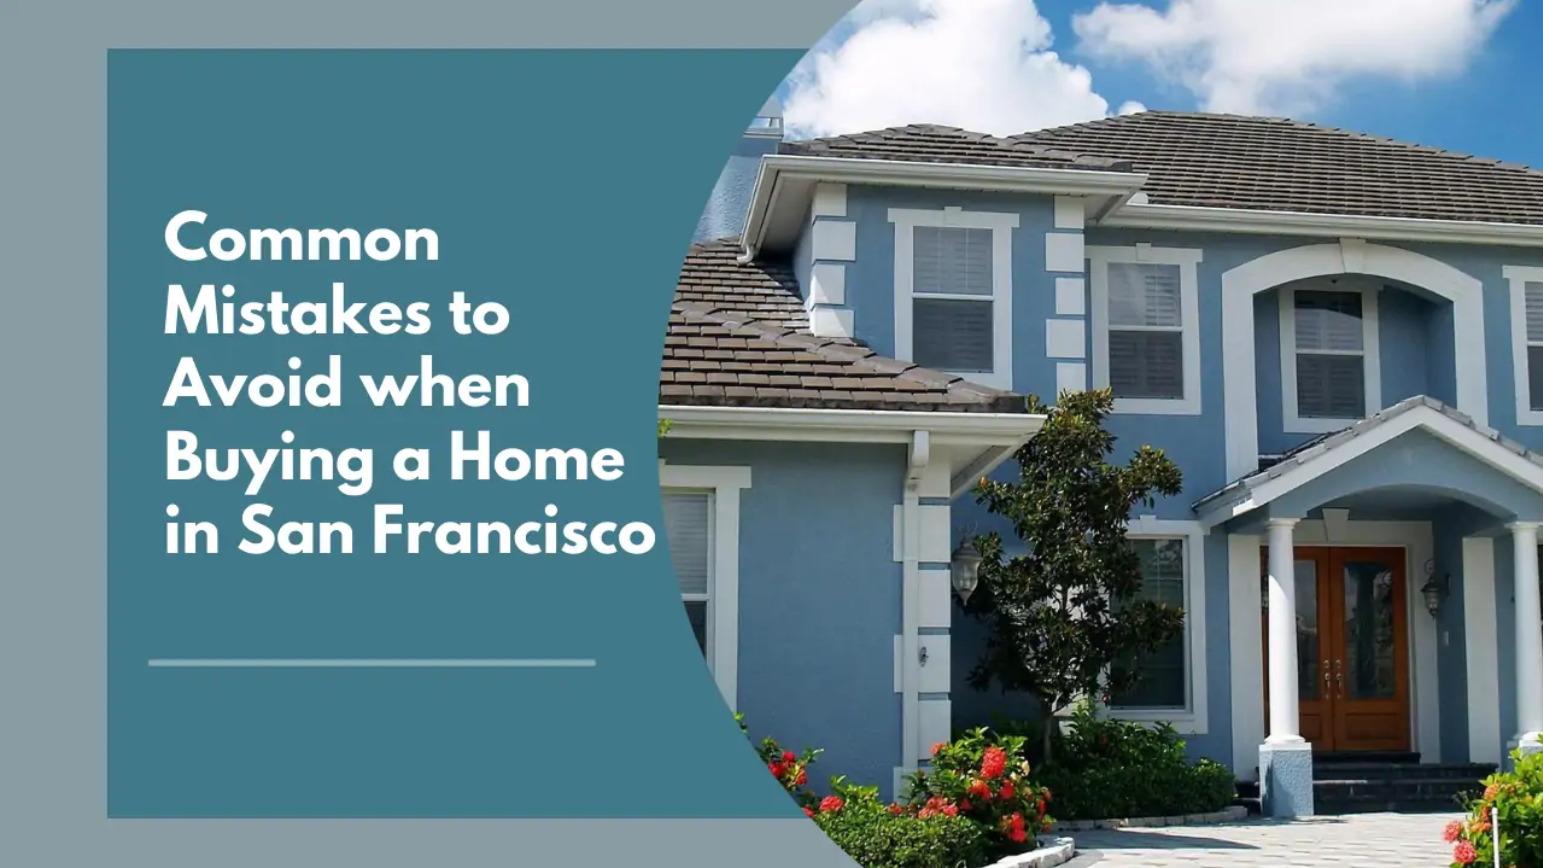 Common Mistakes to Avoid when Buying a Home in San Francisco